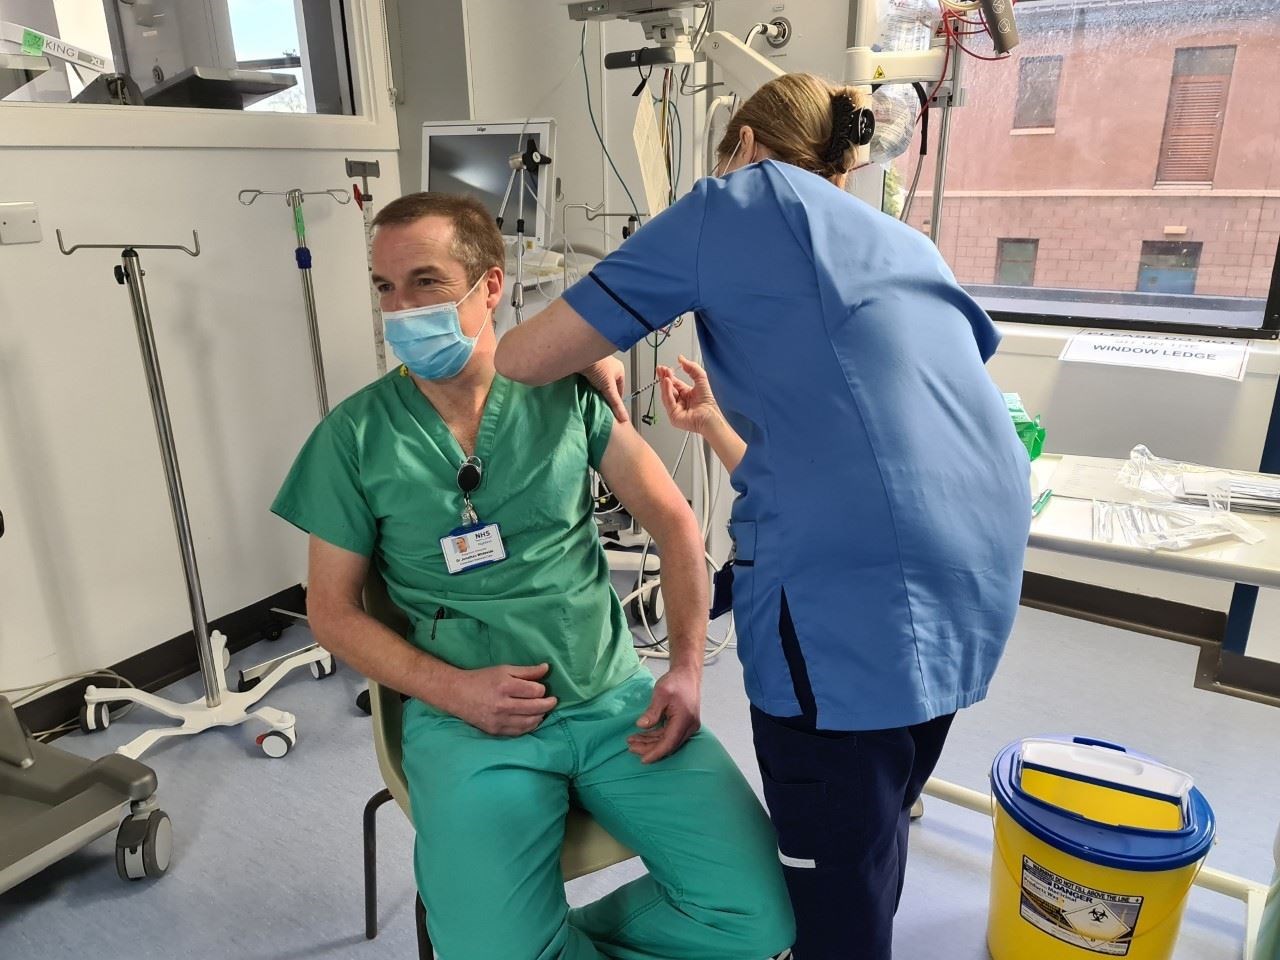 Dr Jonathan Whiteside, Clinical Lead for Critical Care with NHS Highland, is the firstperson to be vaccinated within the NHS Highland area. Maureen Sutherland is administering the vaccine.